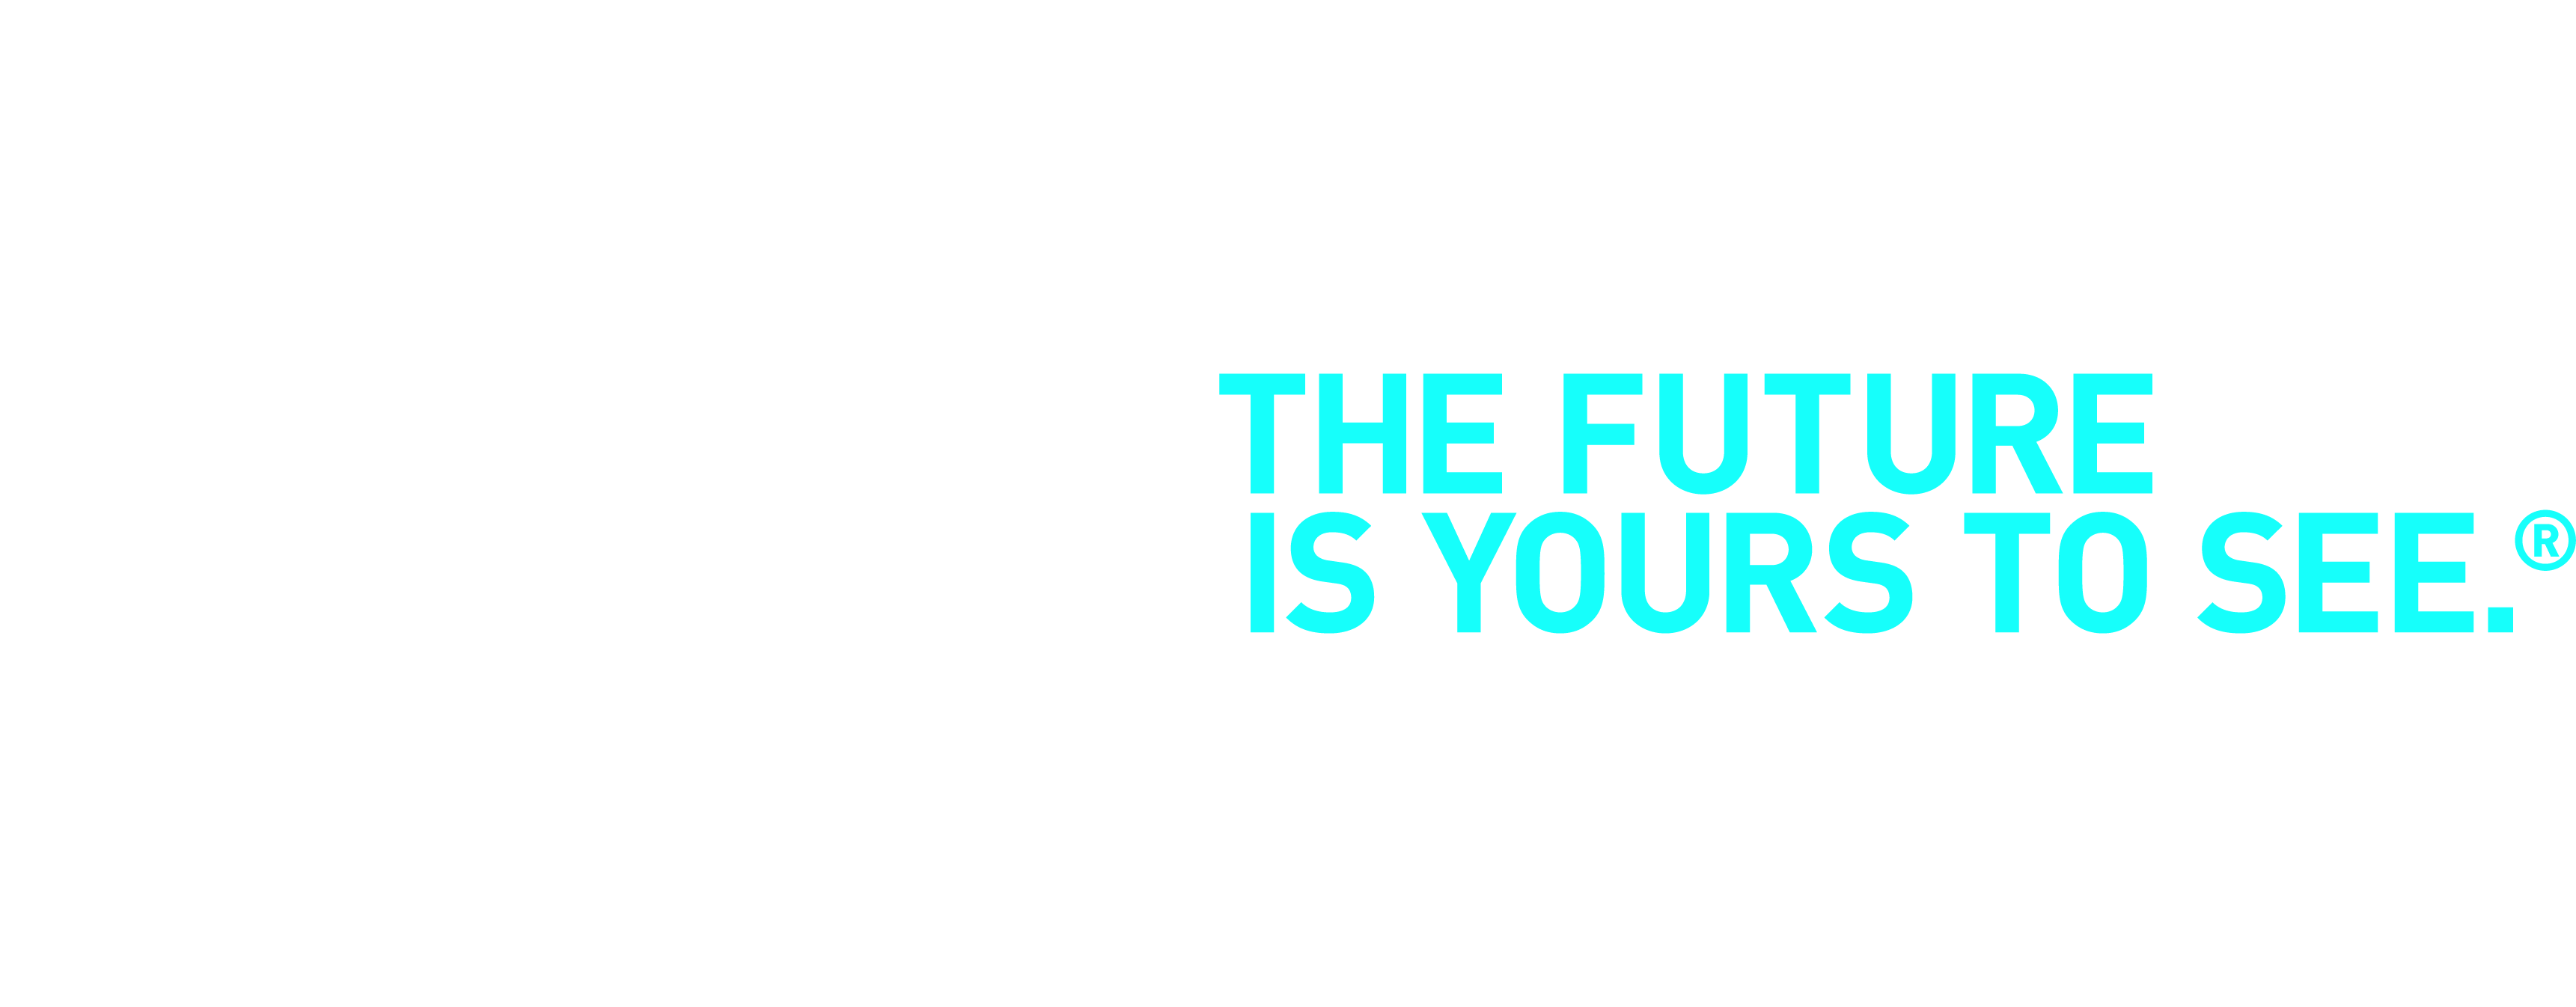 TMX | THE FUTURE IS YOURS TO SEE